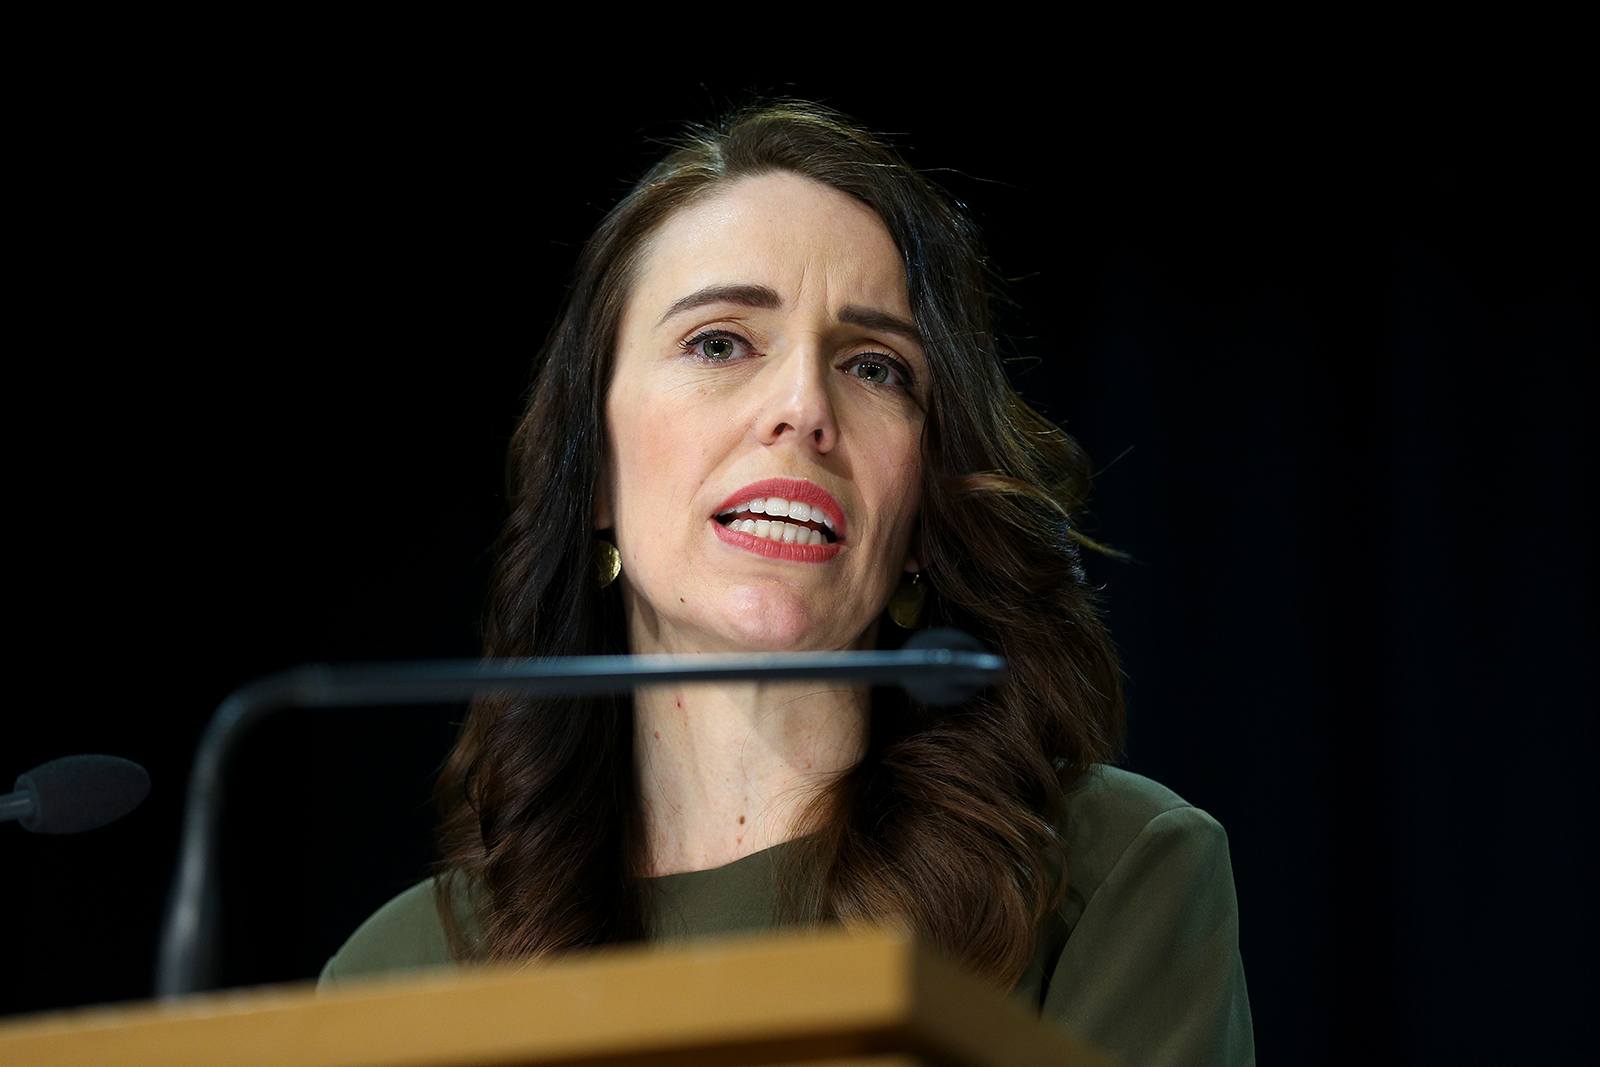 Prime Minister Jacinda Ardern speaks to media during a press conference at Parliament in Wellington, New Zealand on August 17.